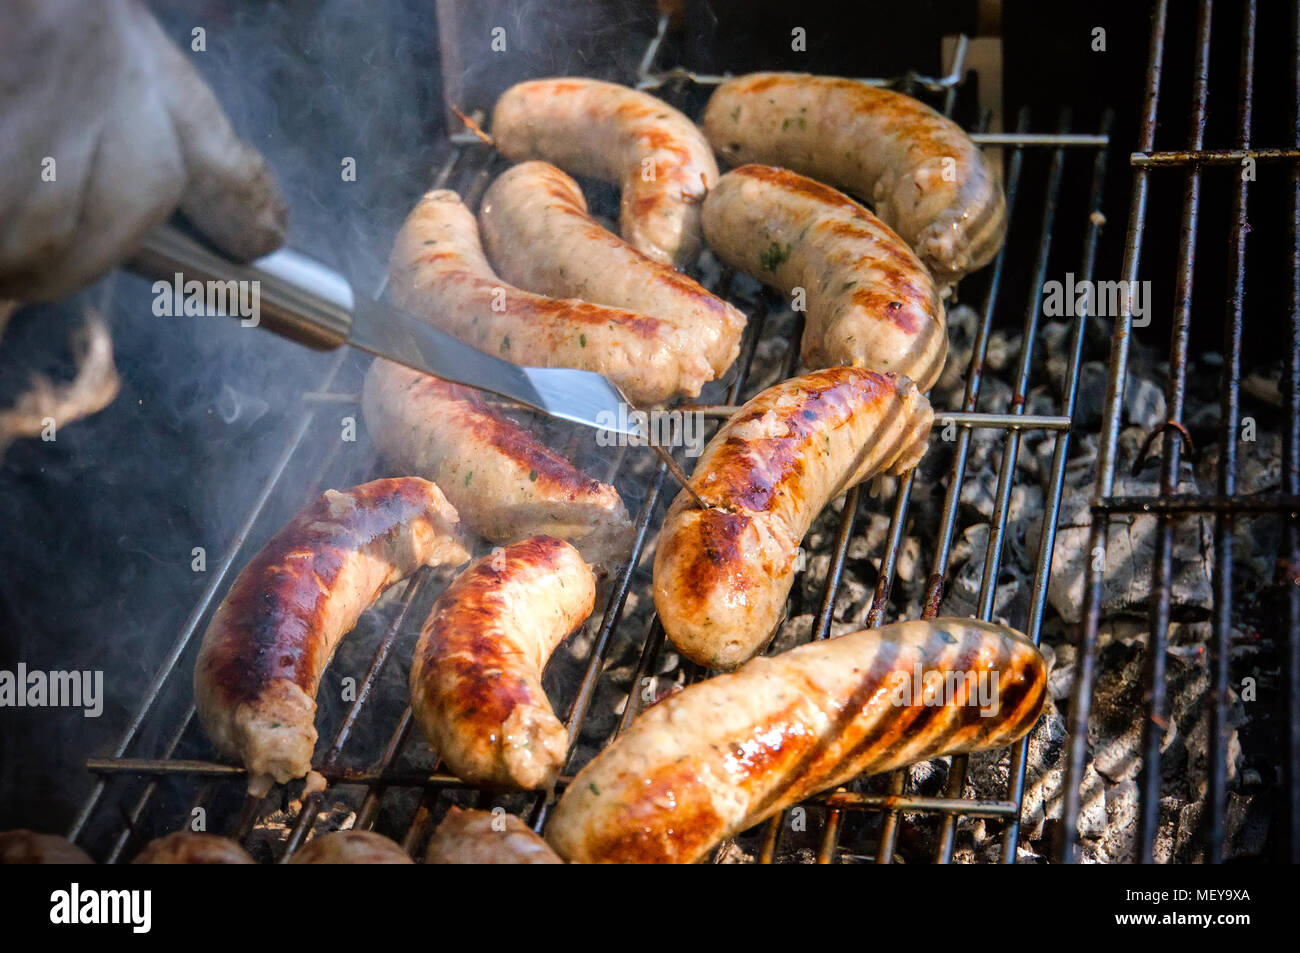 Fresh sausage. Hot dogs grilling outdoors on a gas barbecue grill. Male cook flips grilled sausages on open fire. Stock Photo